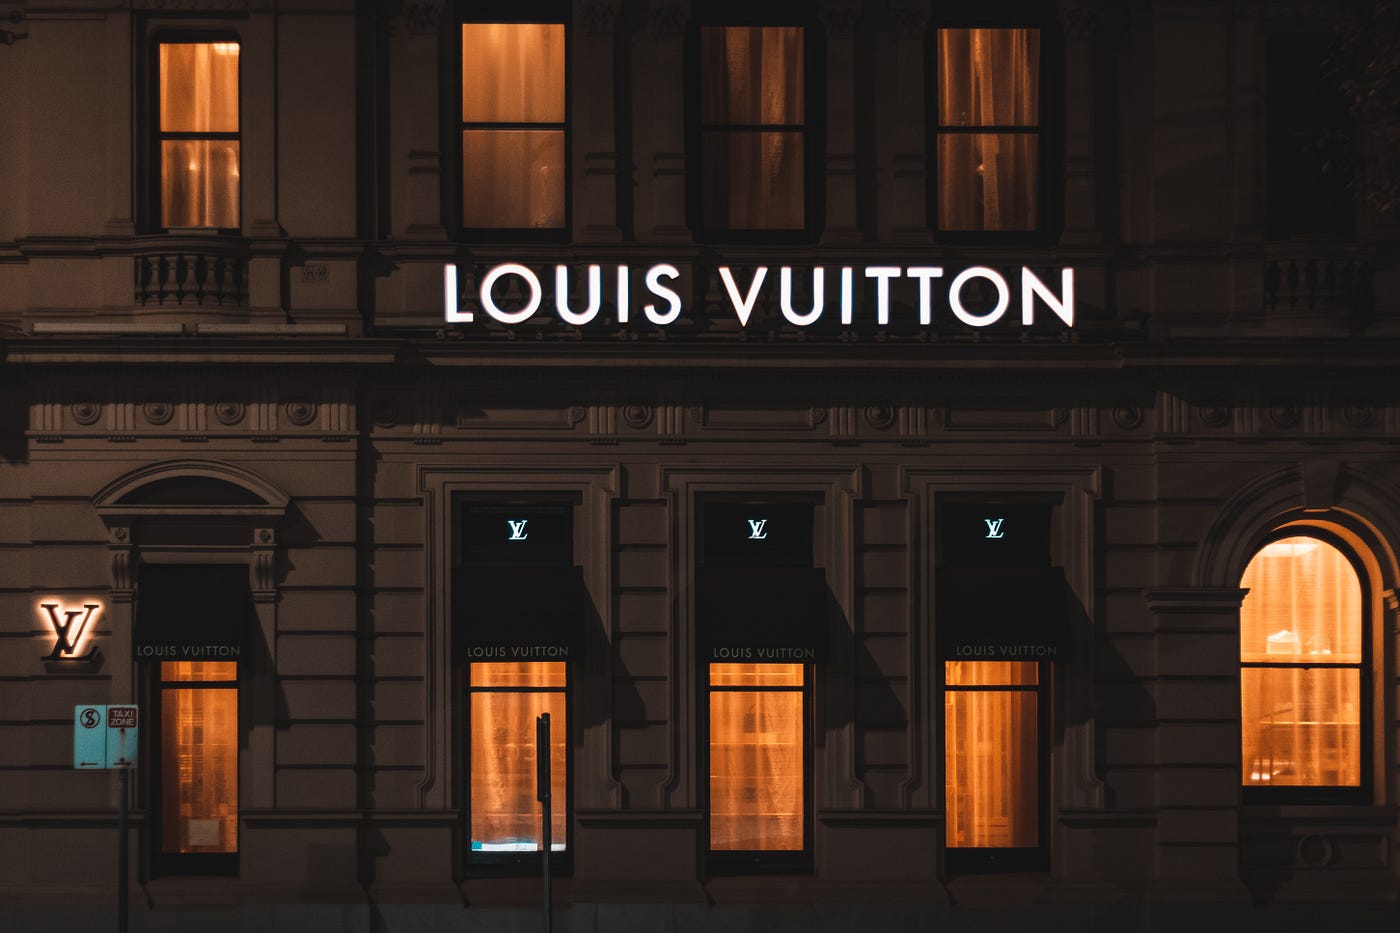 Beyond Luxury: Exploring the Evolution of Louis Vuitton's Iconic Brand”, by SUNISHQ